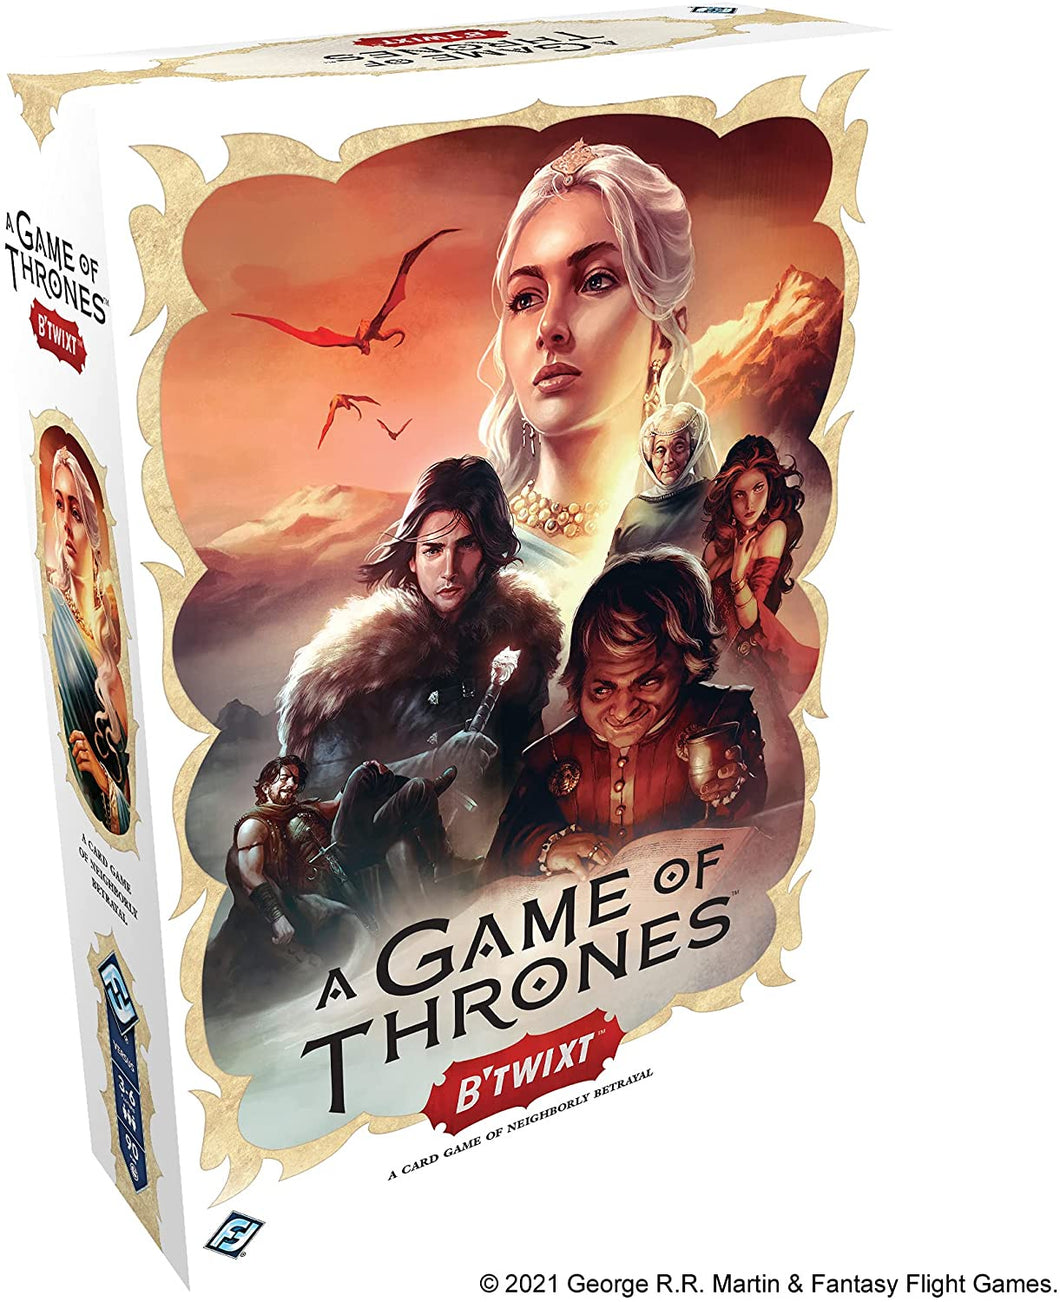 A Game of Thrones B Twixt